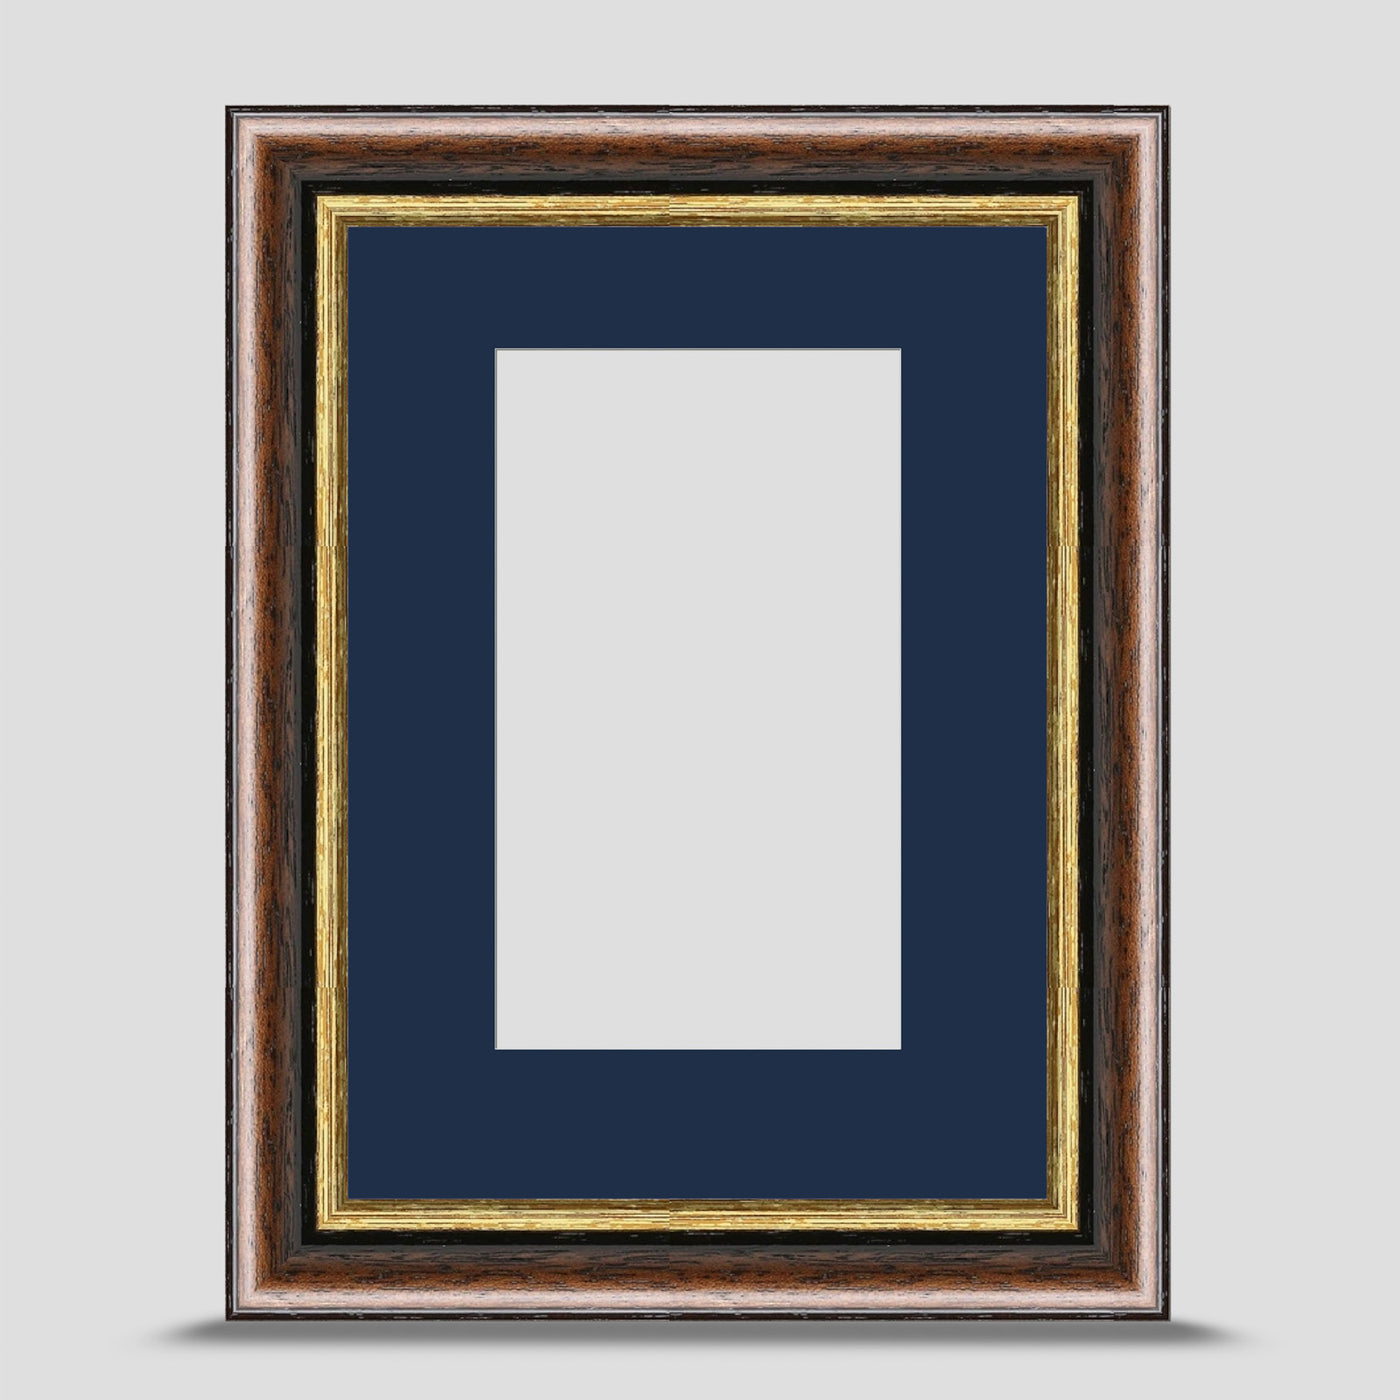 7x5 Brown & Gold Picture Frame with a 5x3 Mount